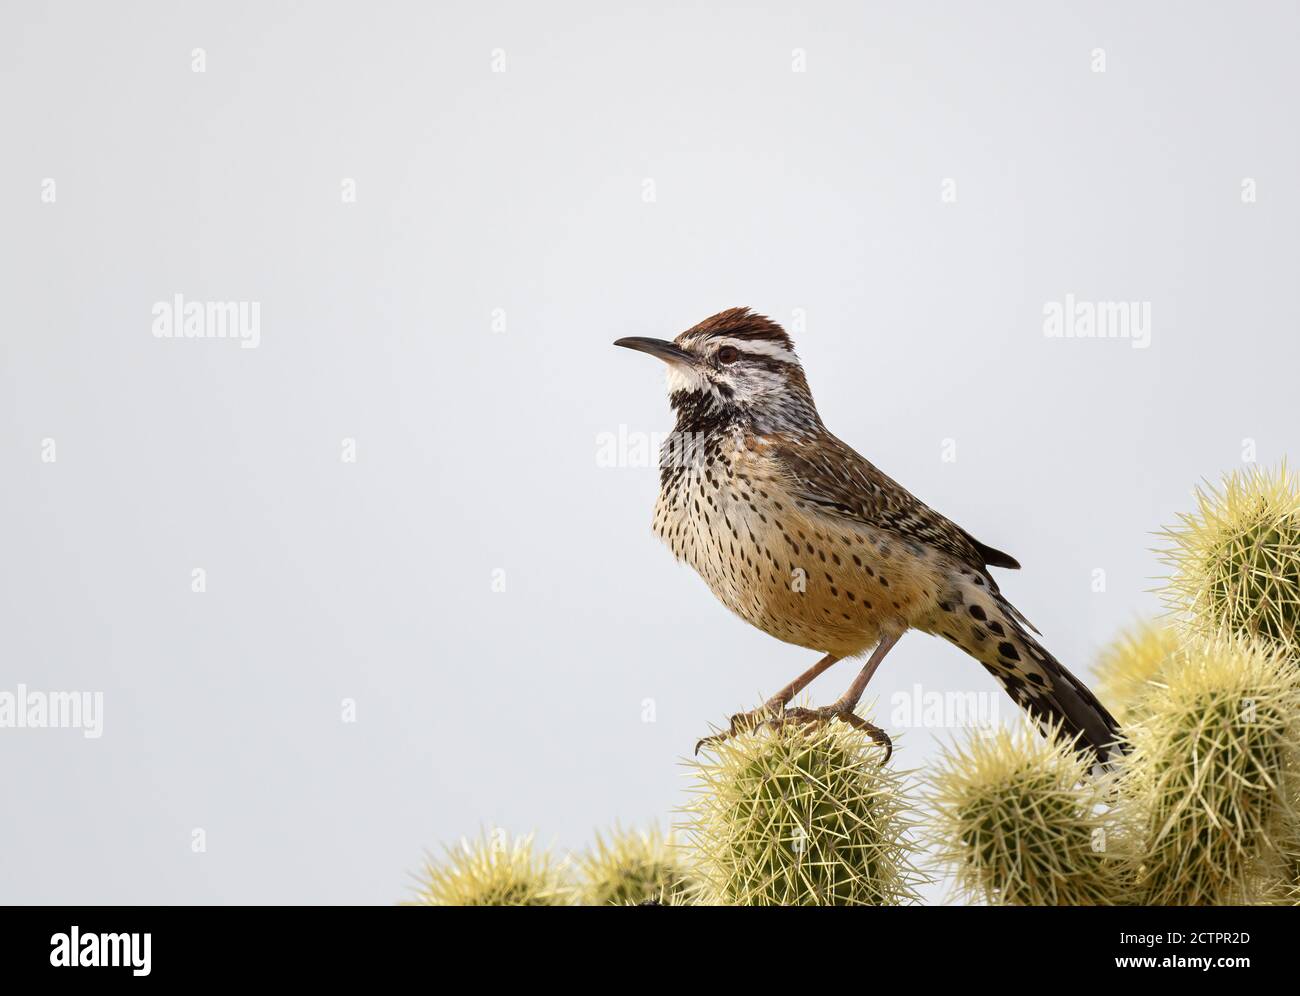 Cactus Wren perched on cactus with pale clear sky Stock Photo